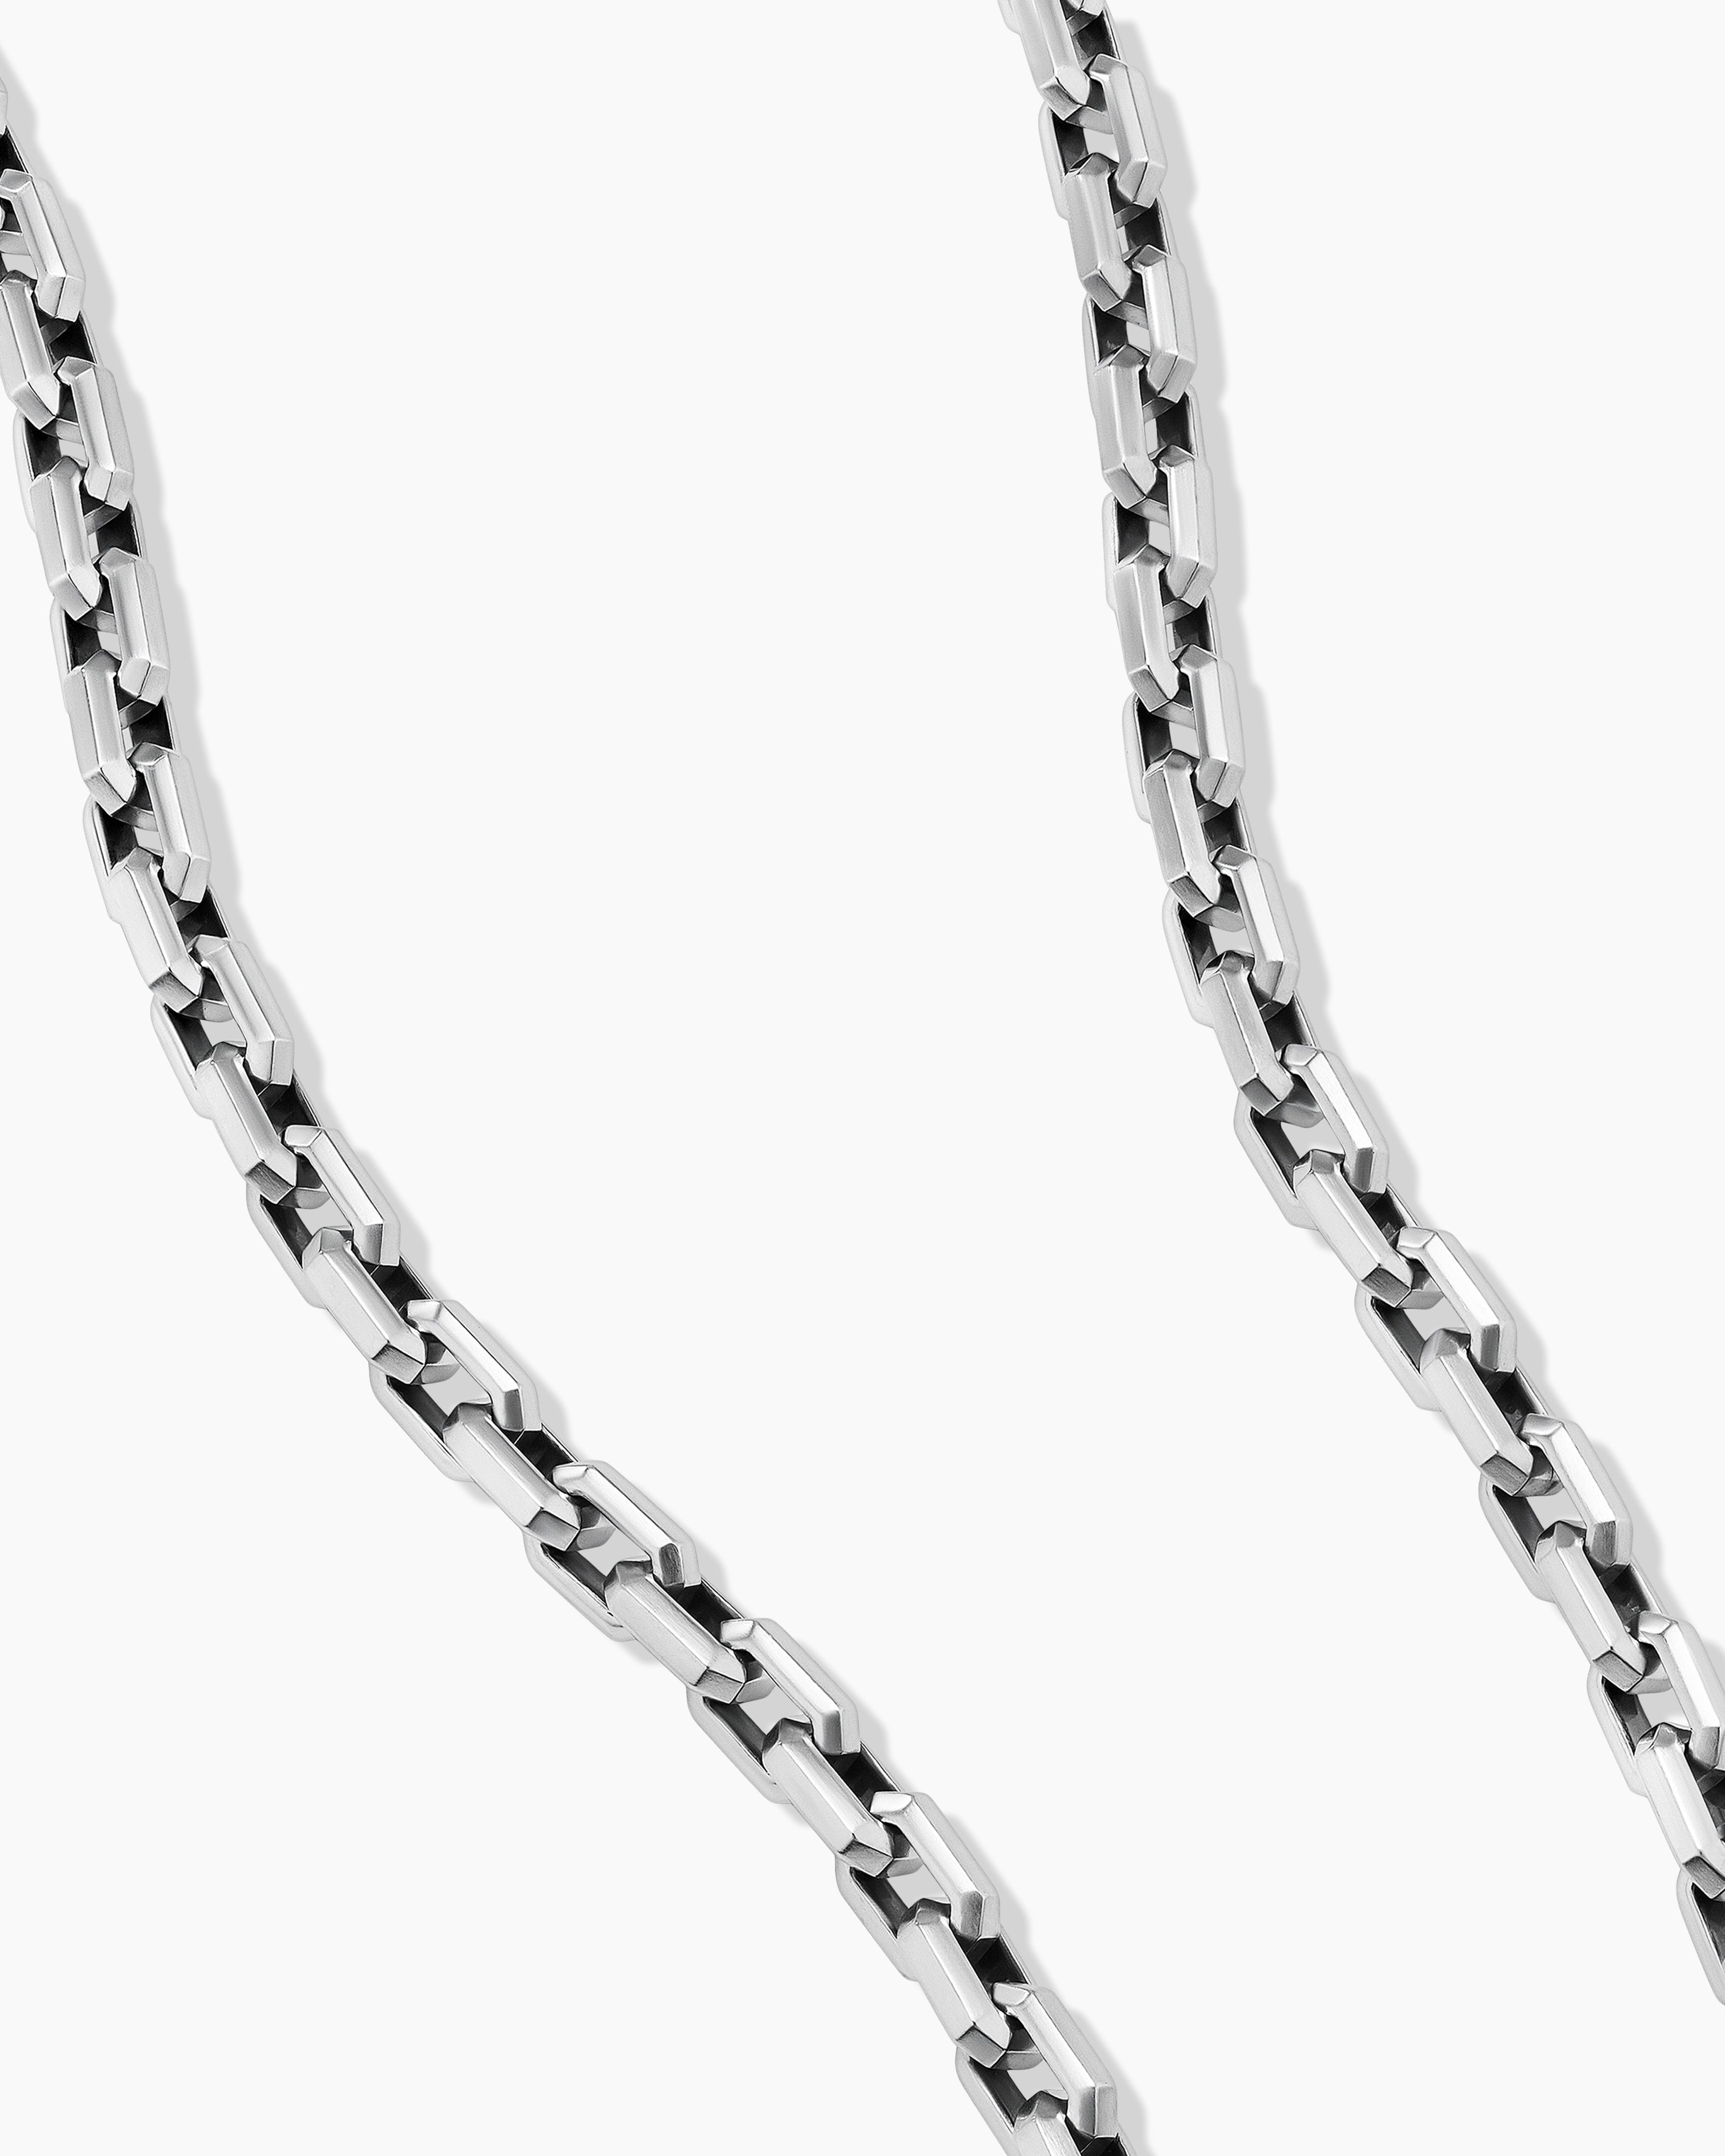 Streamline Heirloom Chain Link Necklace in Sterling Silver, 5.5mm